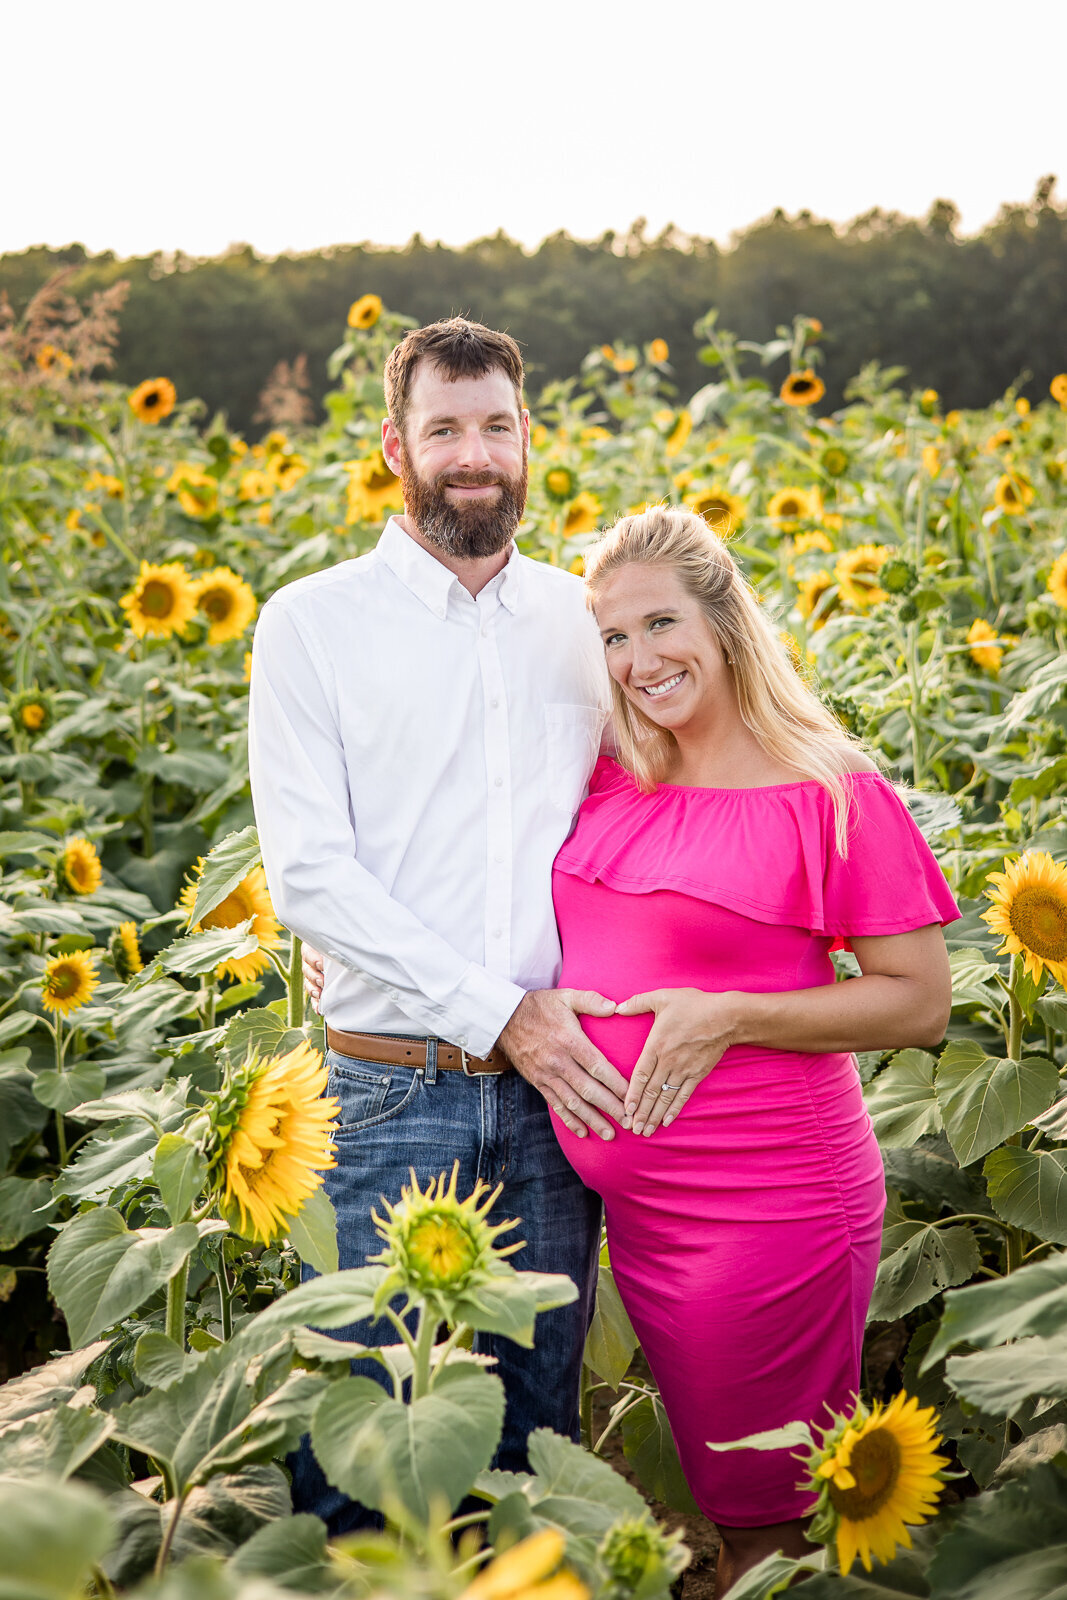 Outdoor_maternity_lifestyle_photography_session_Georgetown_KY_photographer-7